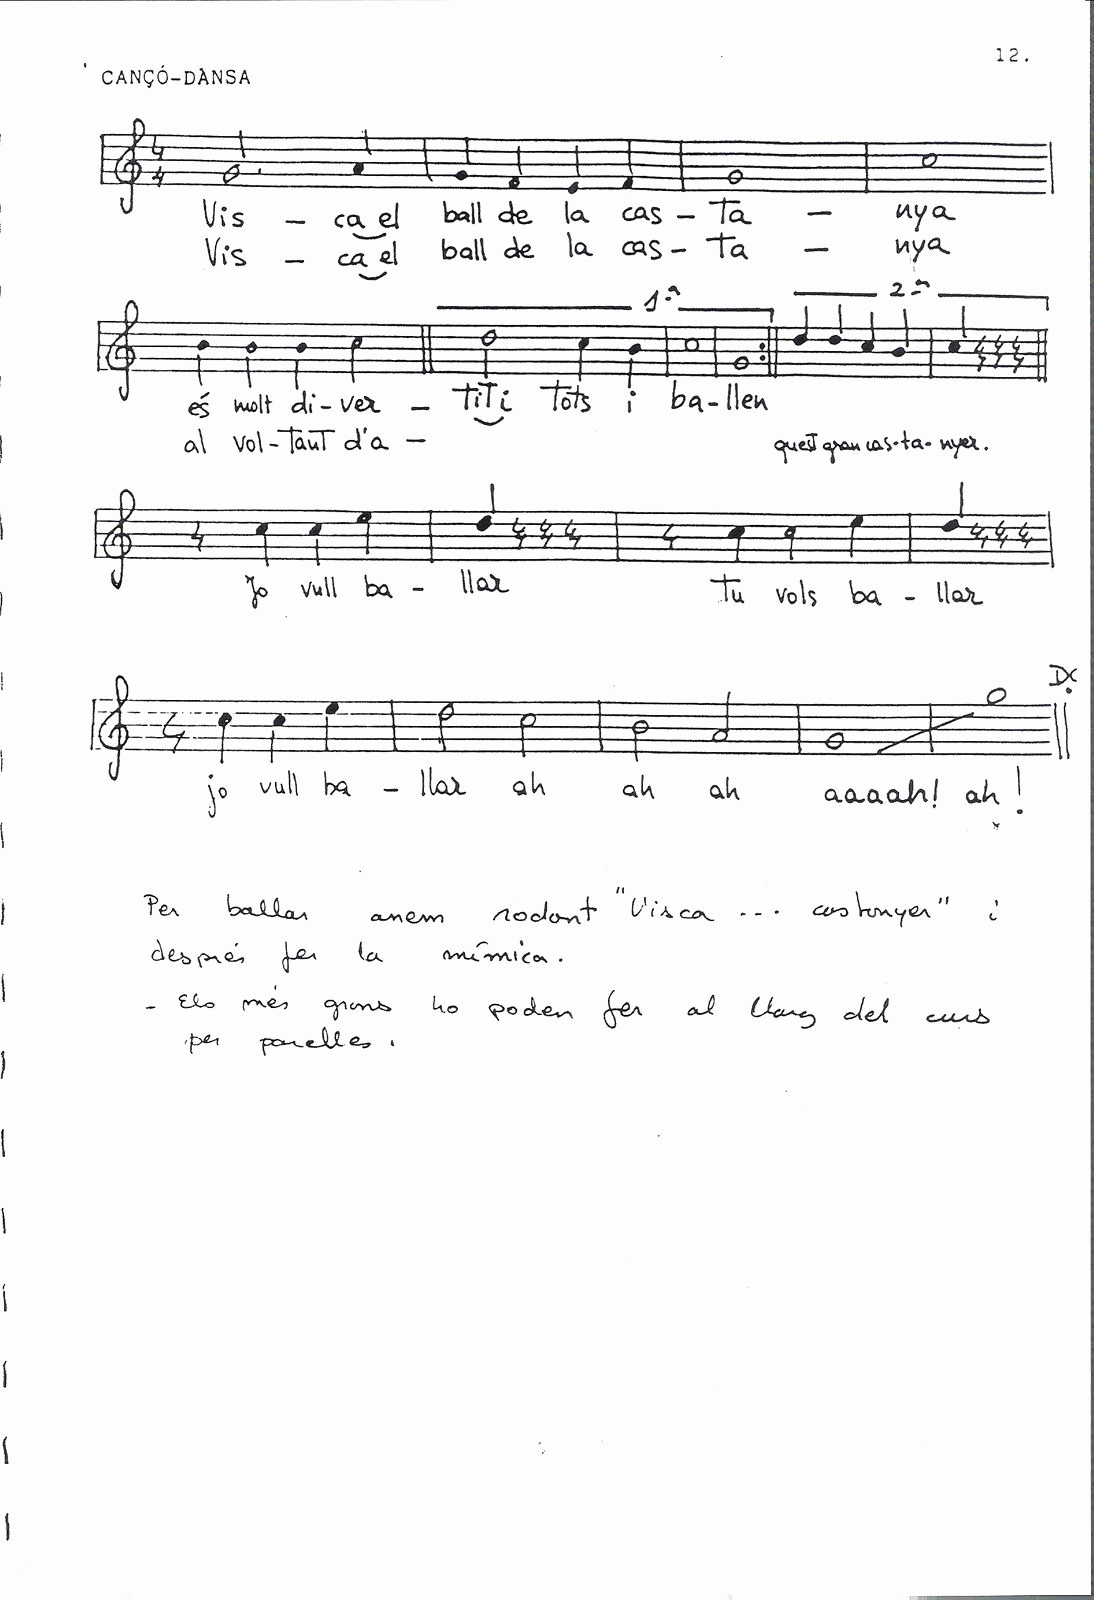 Opus Music Worksheets Answers Lovely Sin Ttulo13 1094×1600